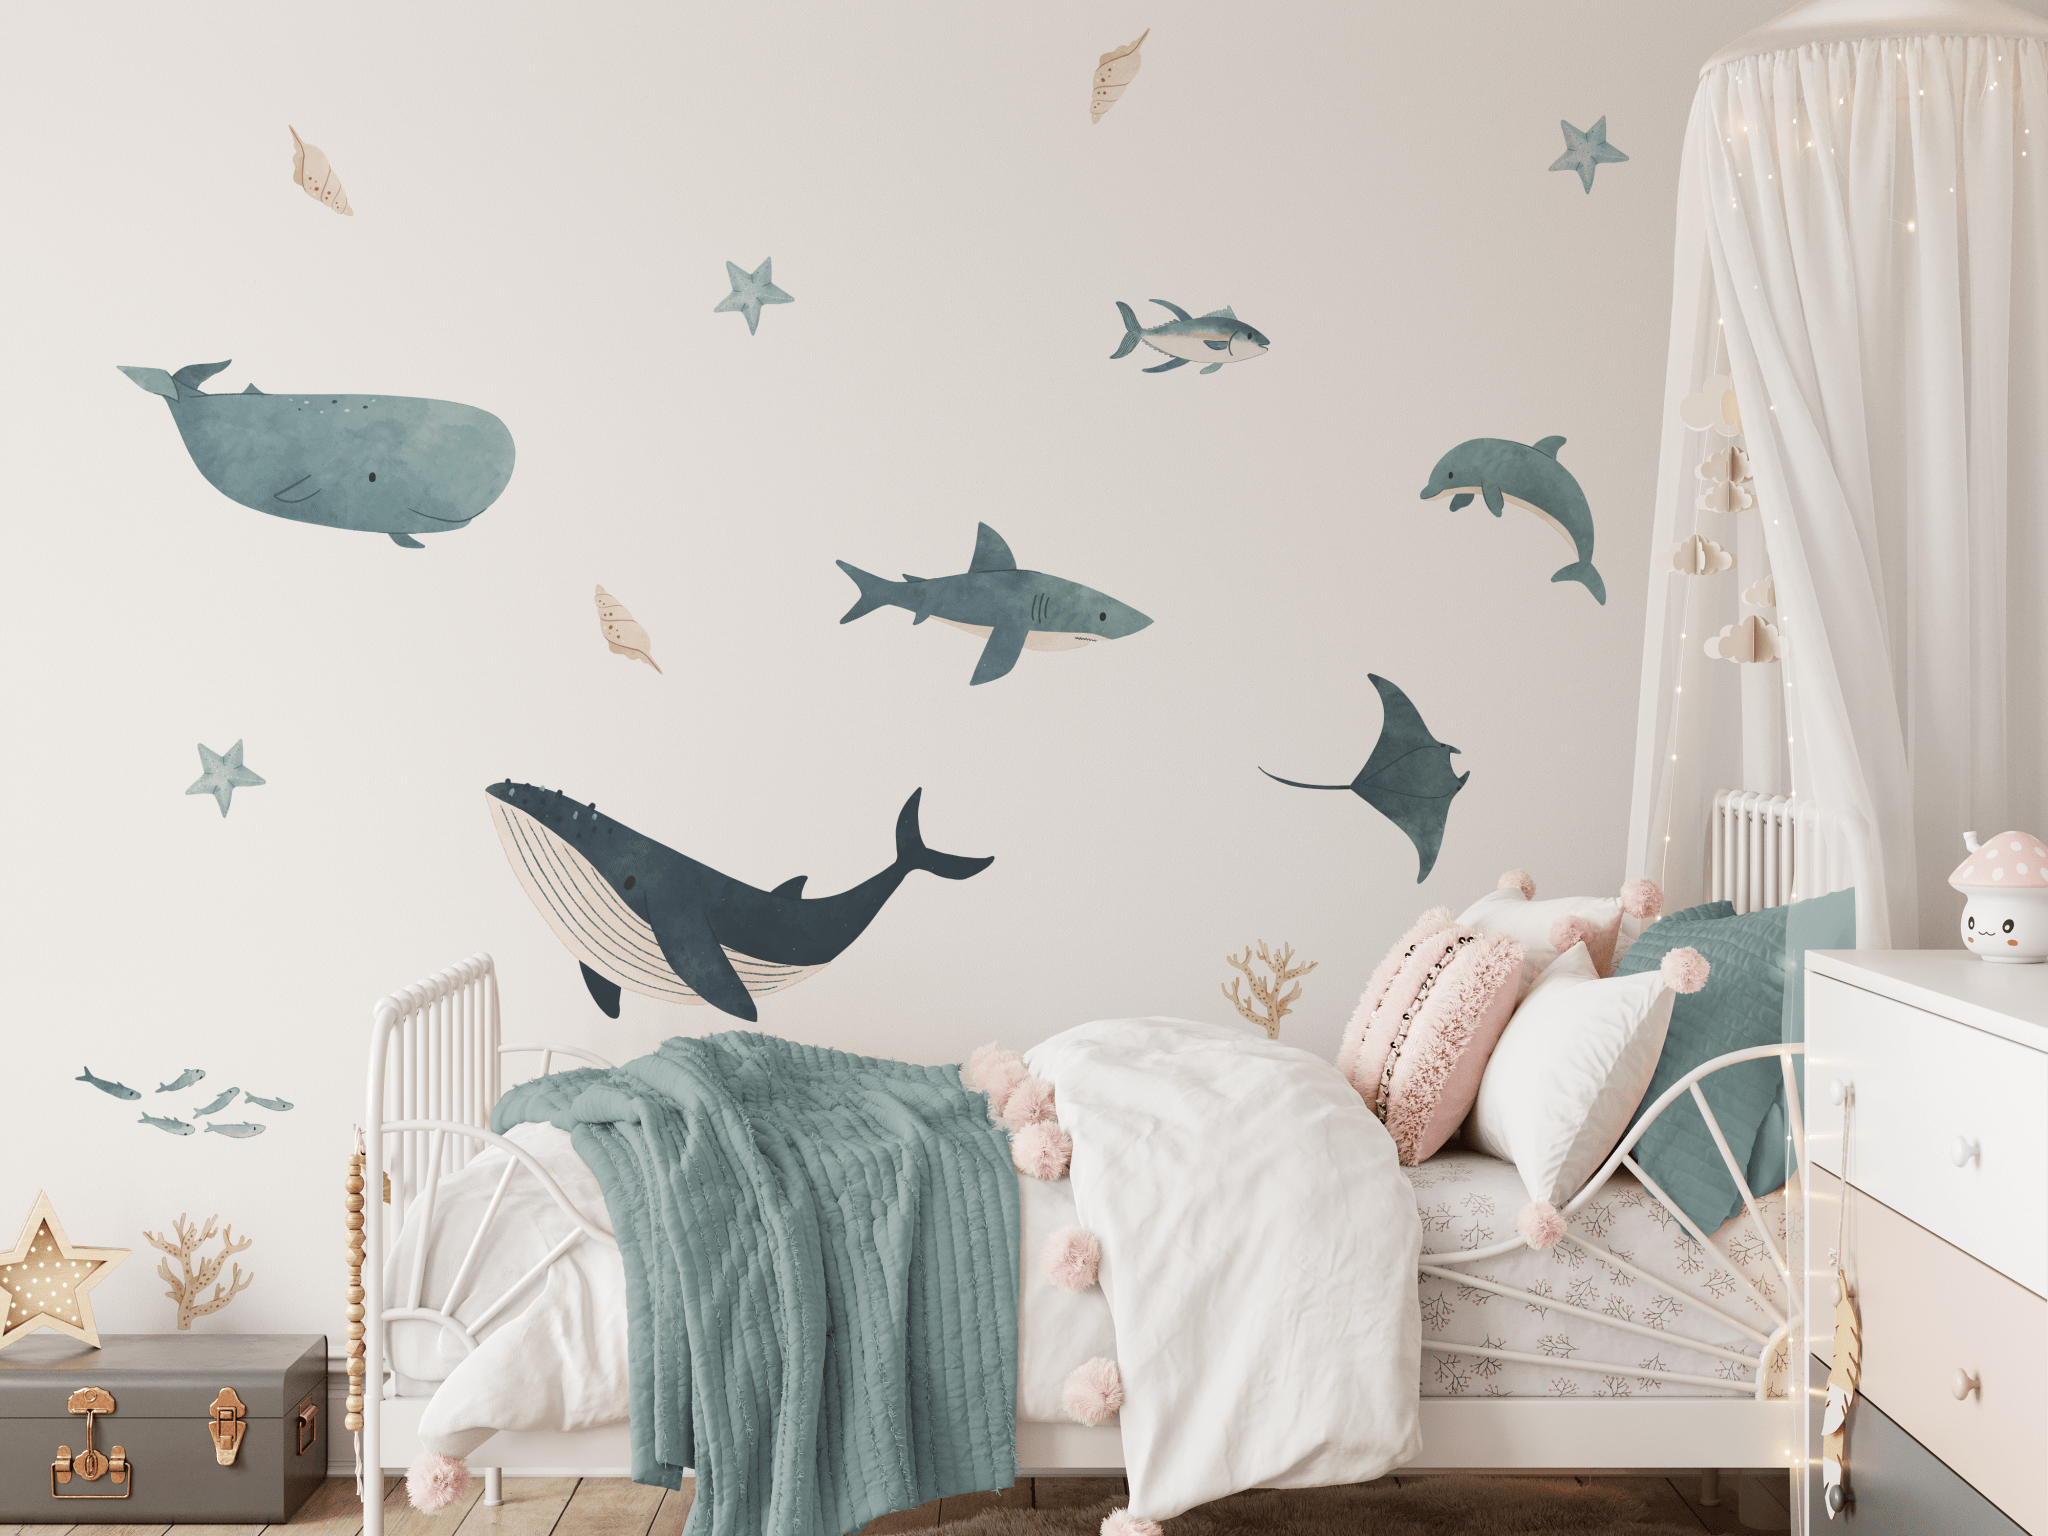 Cozy nursery with gentle ocean wall decals, featuring a white crib with soft textiles and a starry canopy for a peaceful bedtime atmosphere.